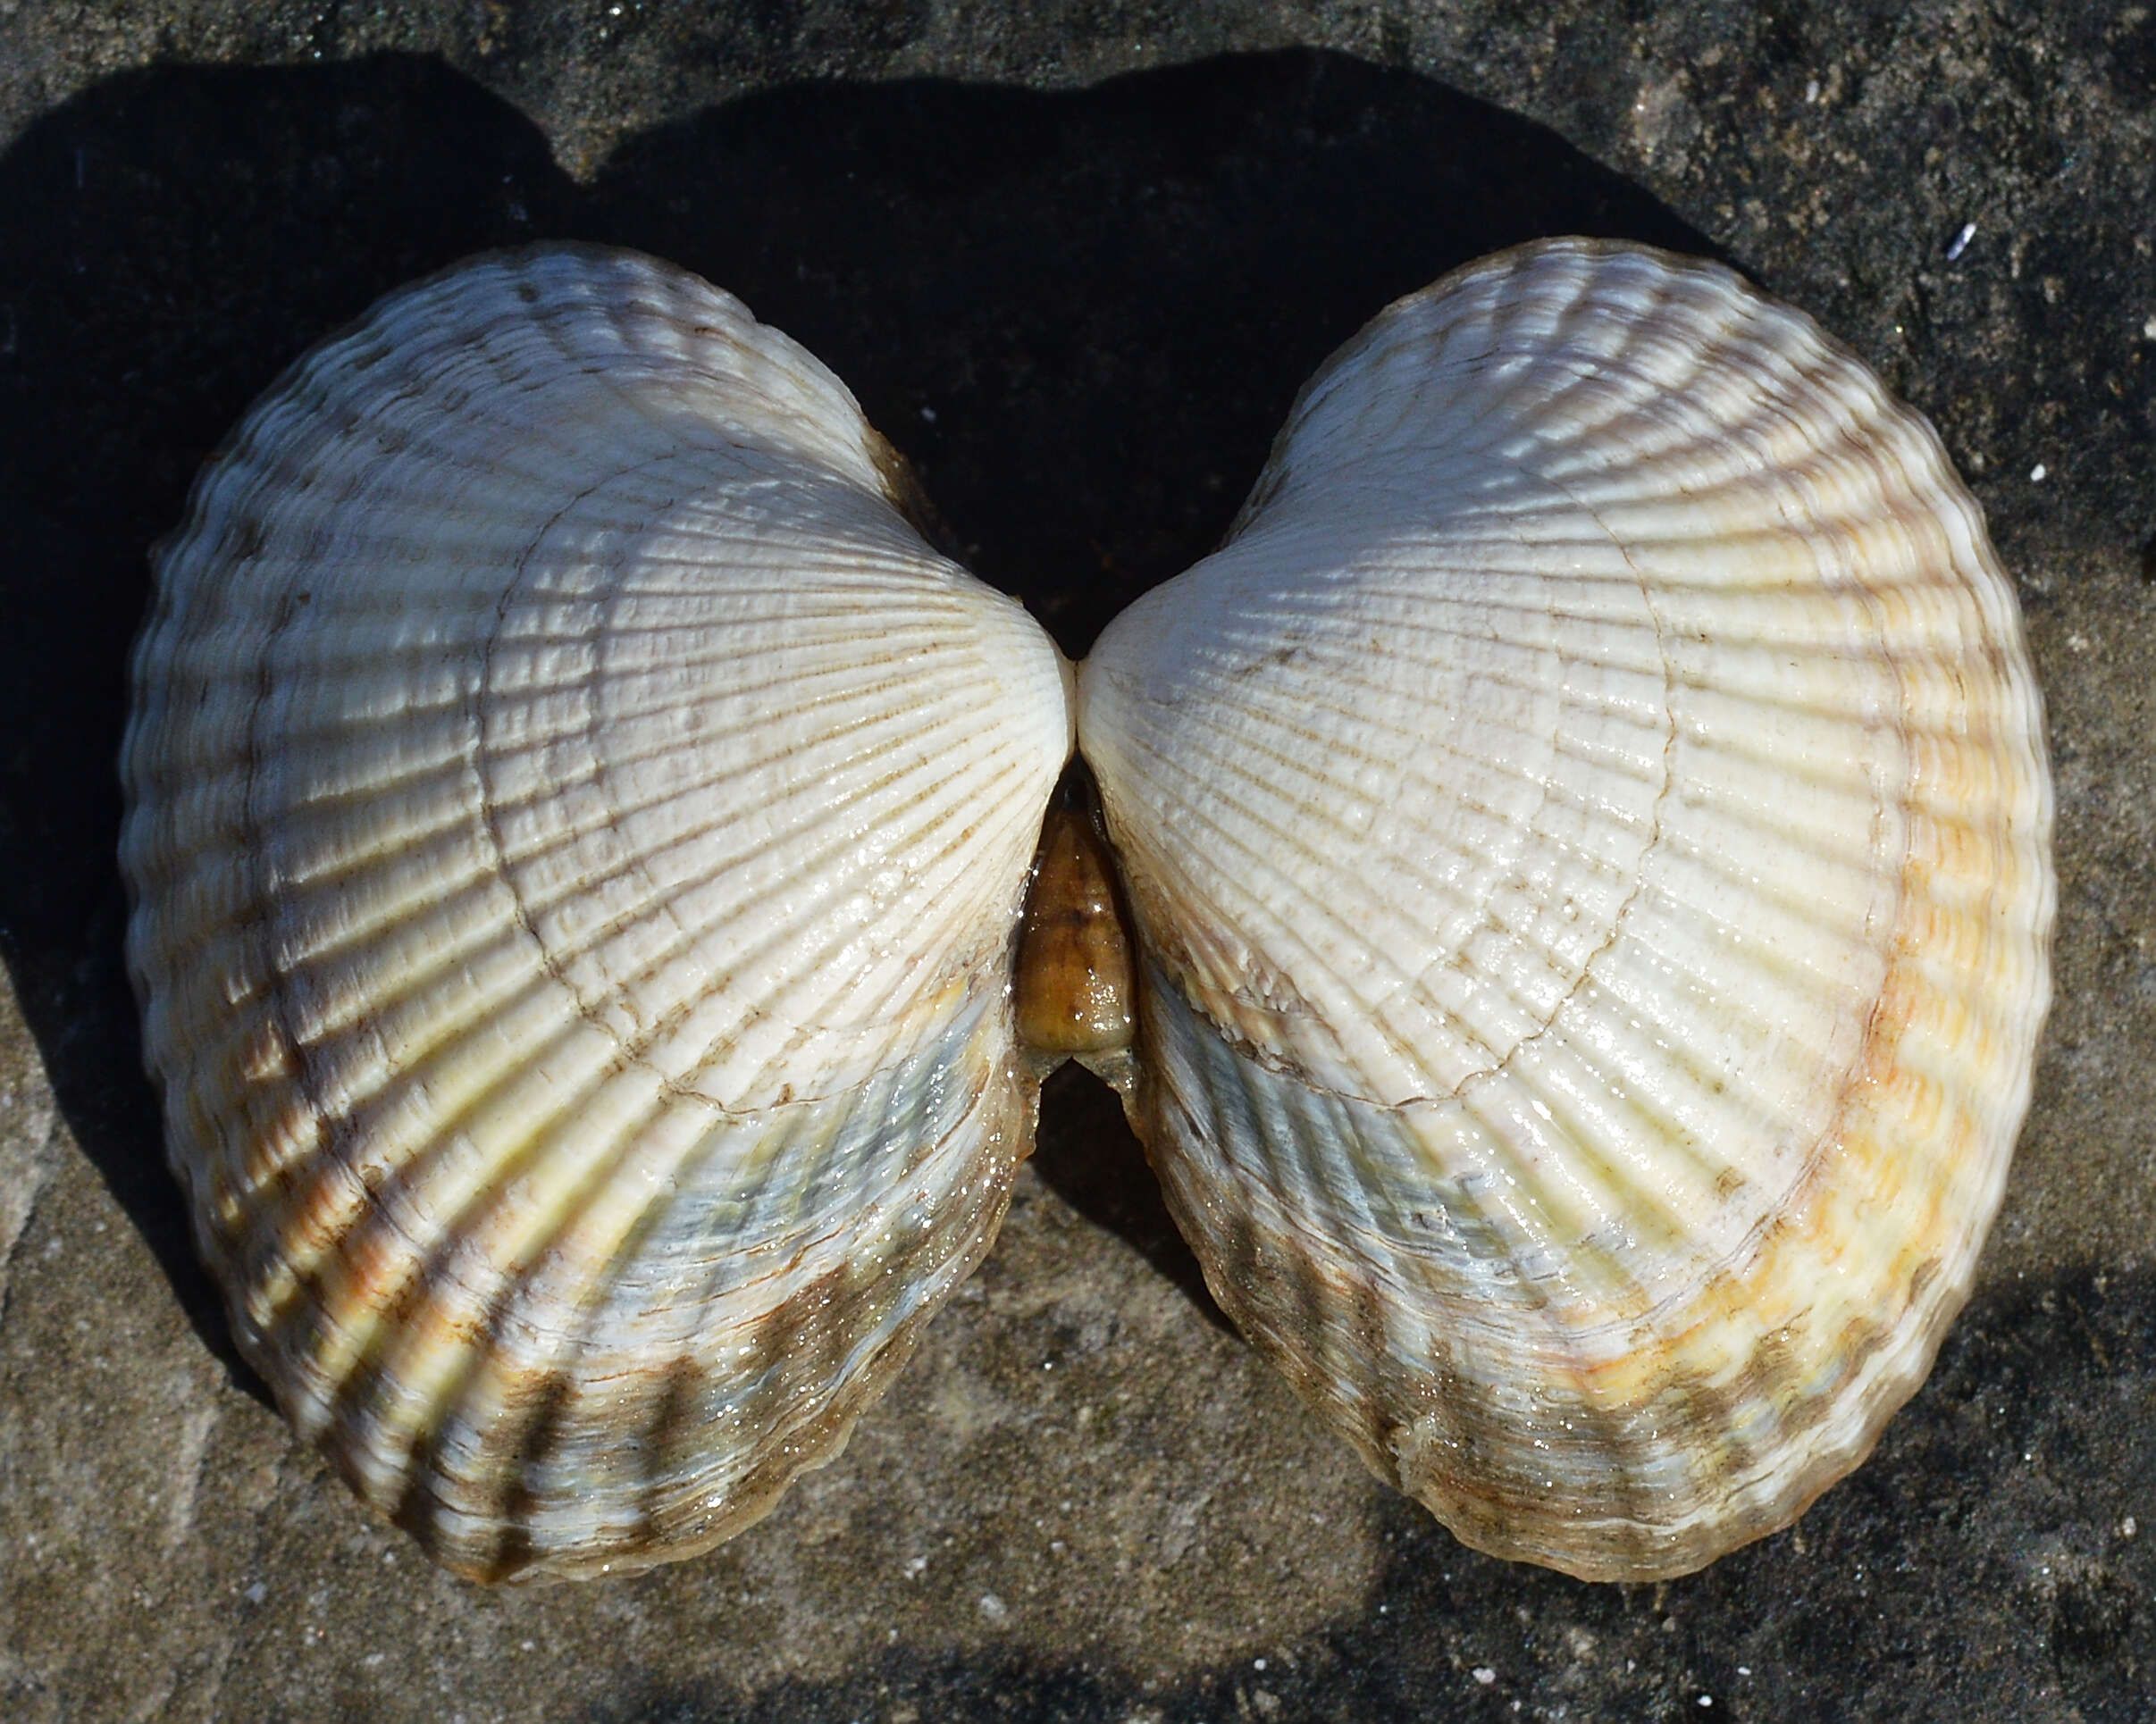 Image of Common cockle